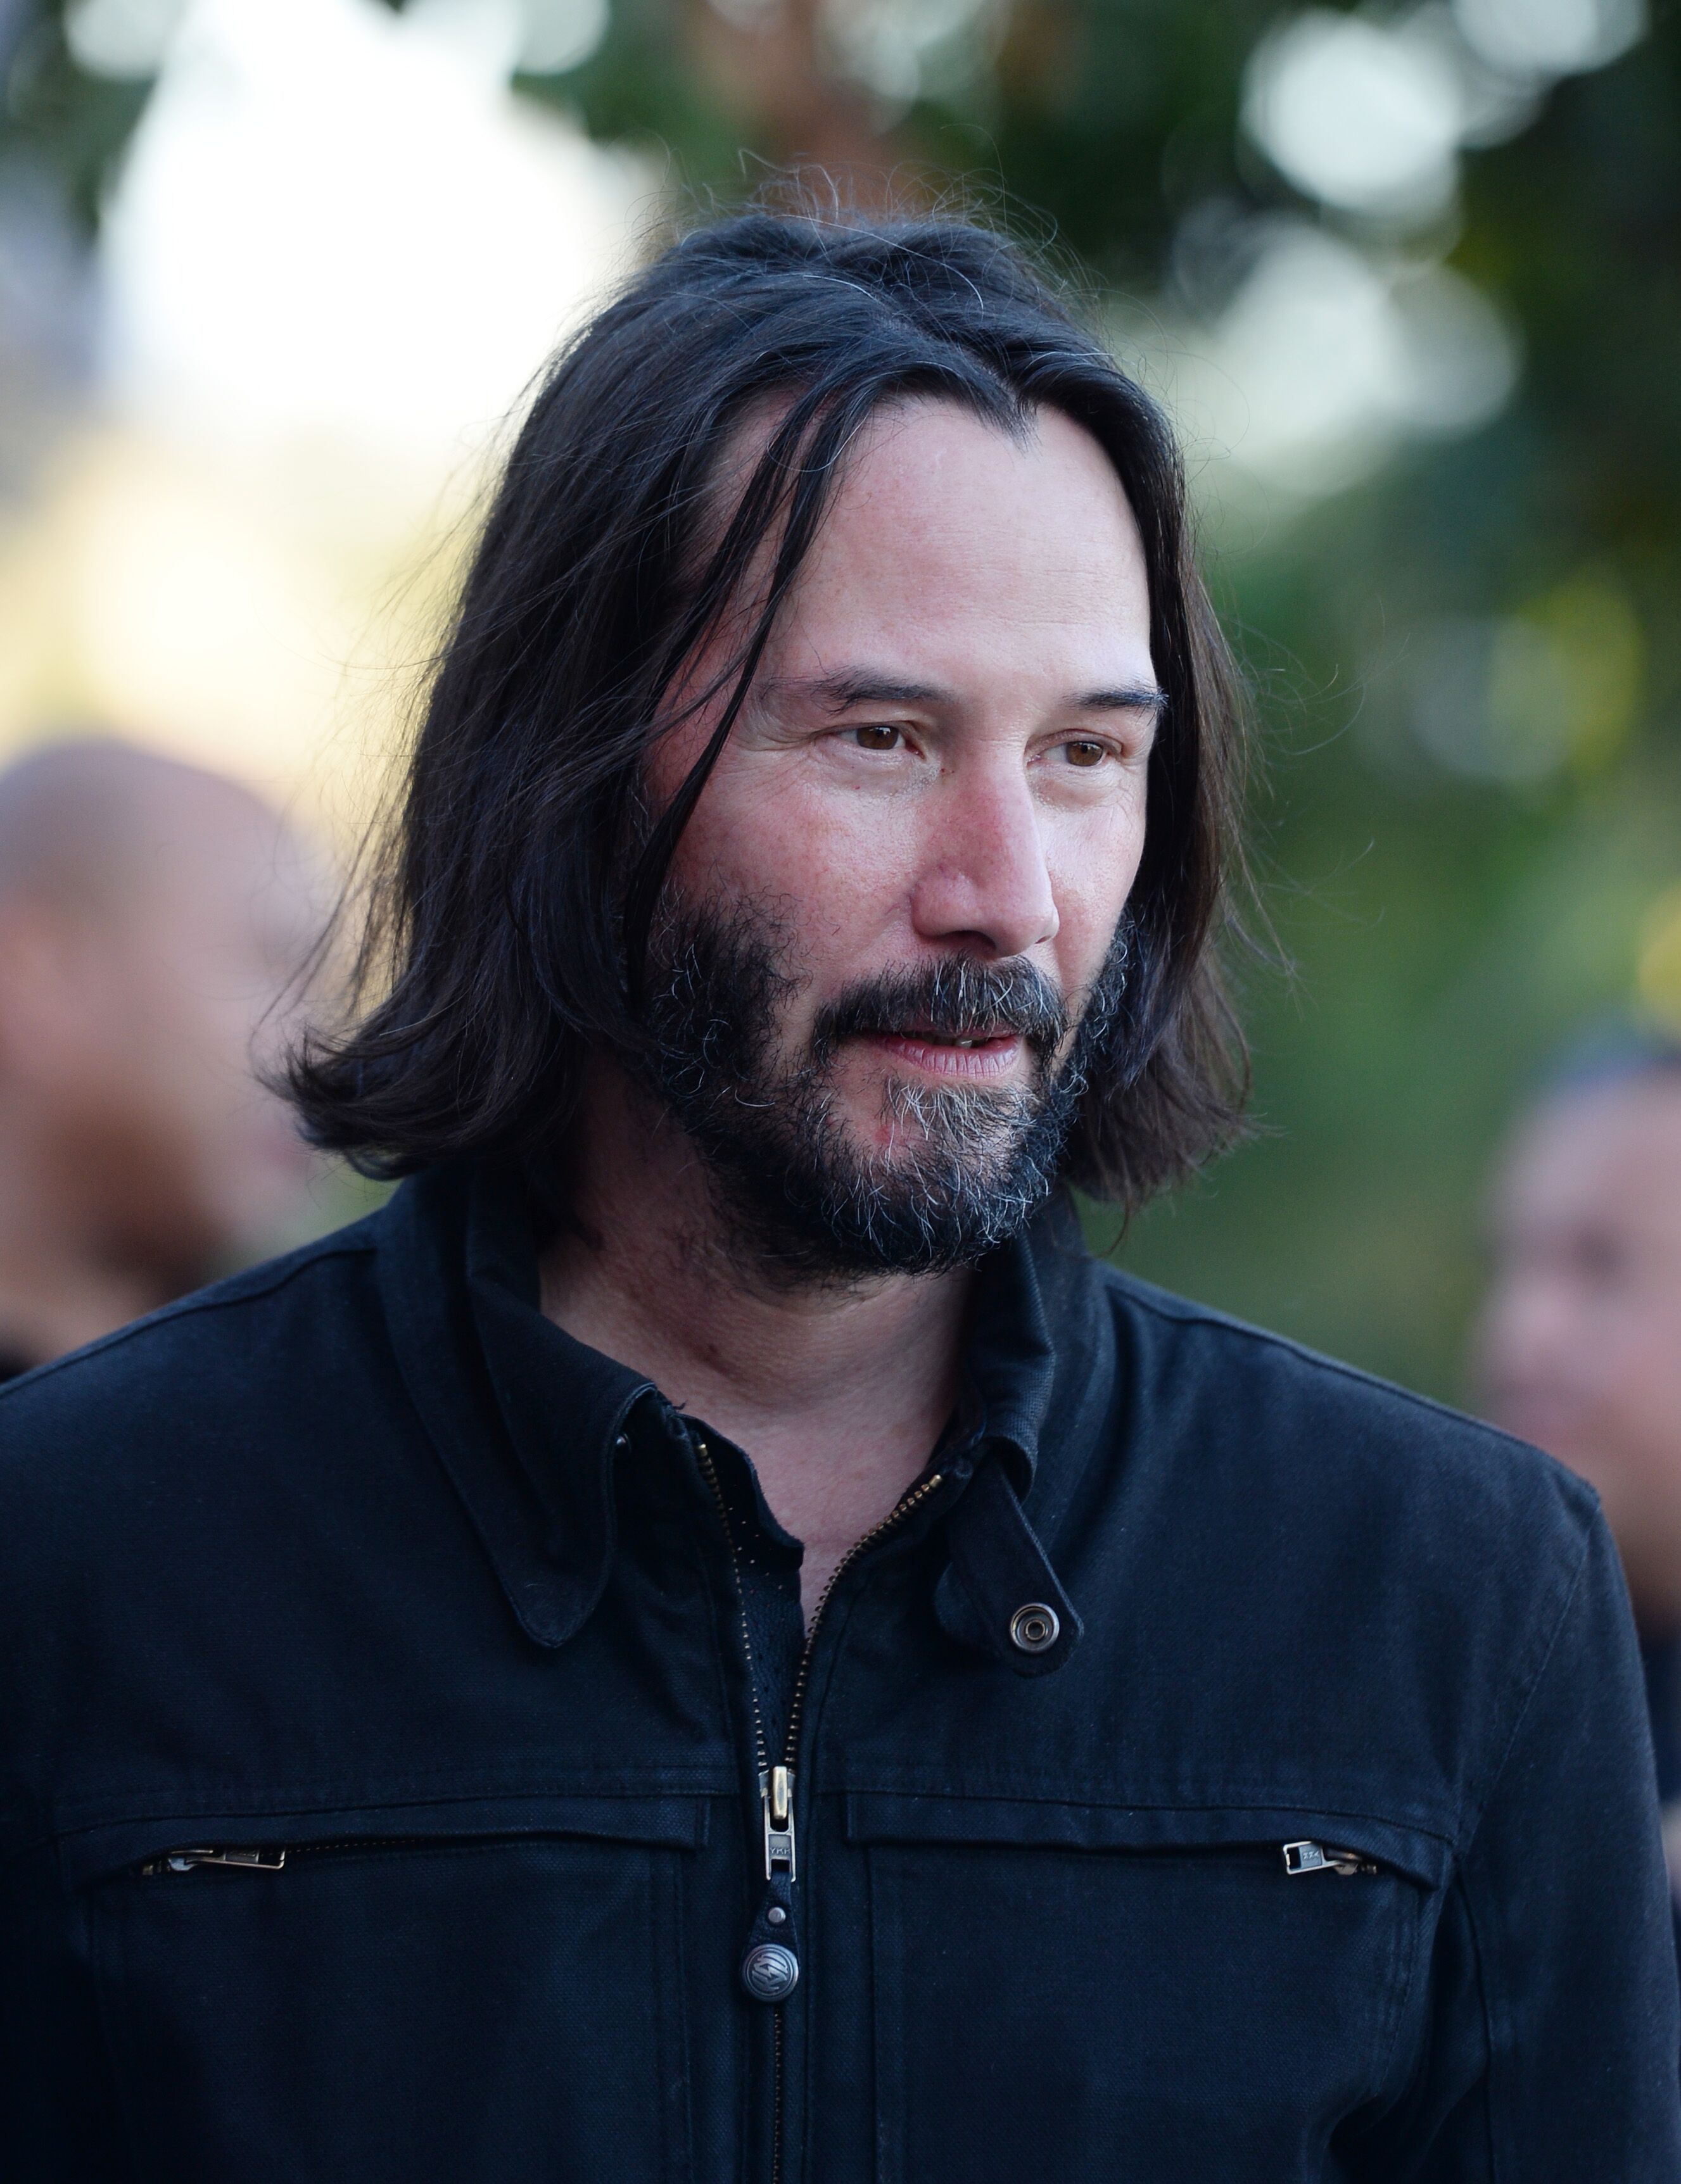 Keanu Reeves arrives at the LA Special Screening of Amazon's "Too Old To Die Young" at the Vista Theatre. | Source: Getty Images